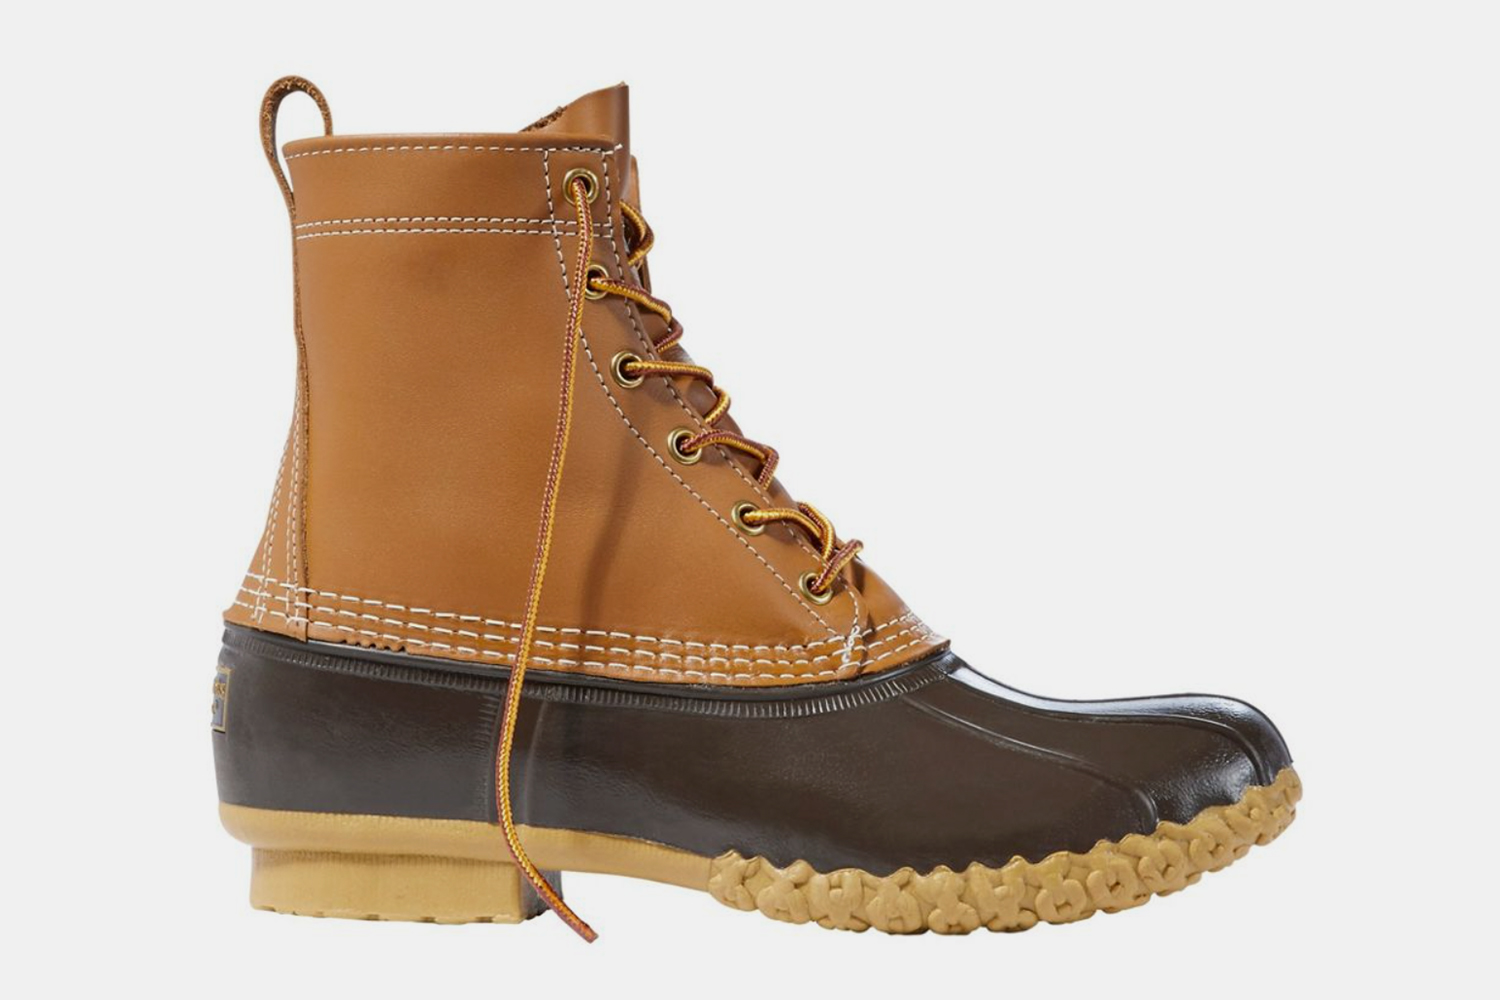 LL Bean Boots Discount During Winter Sale